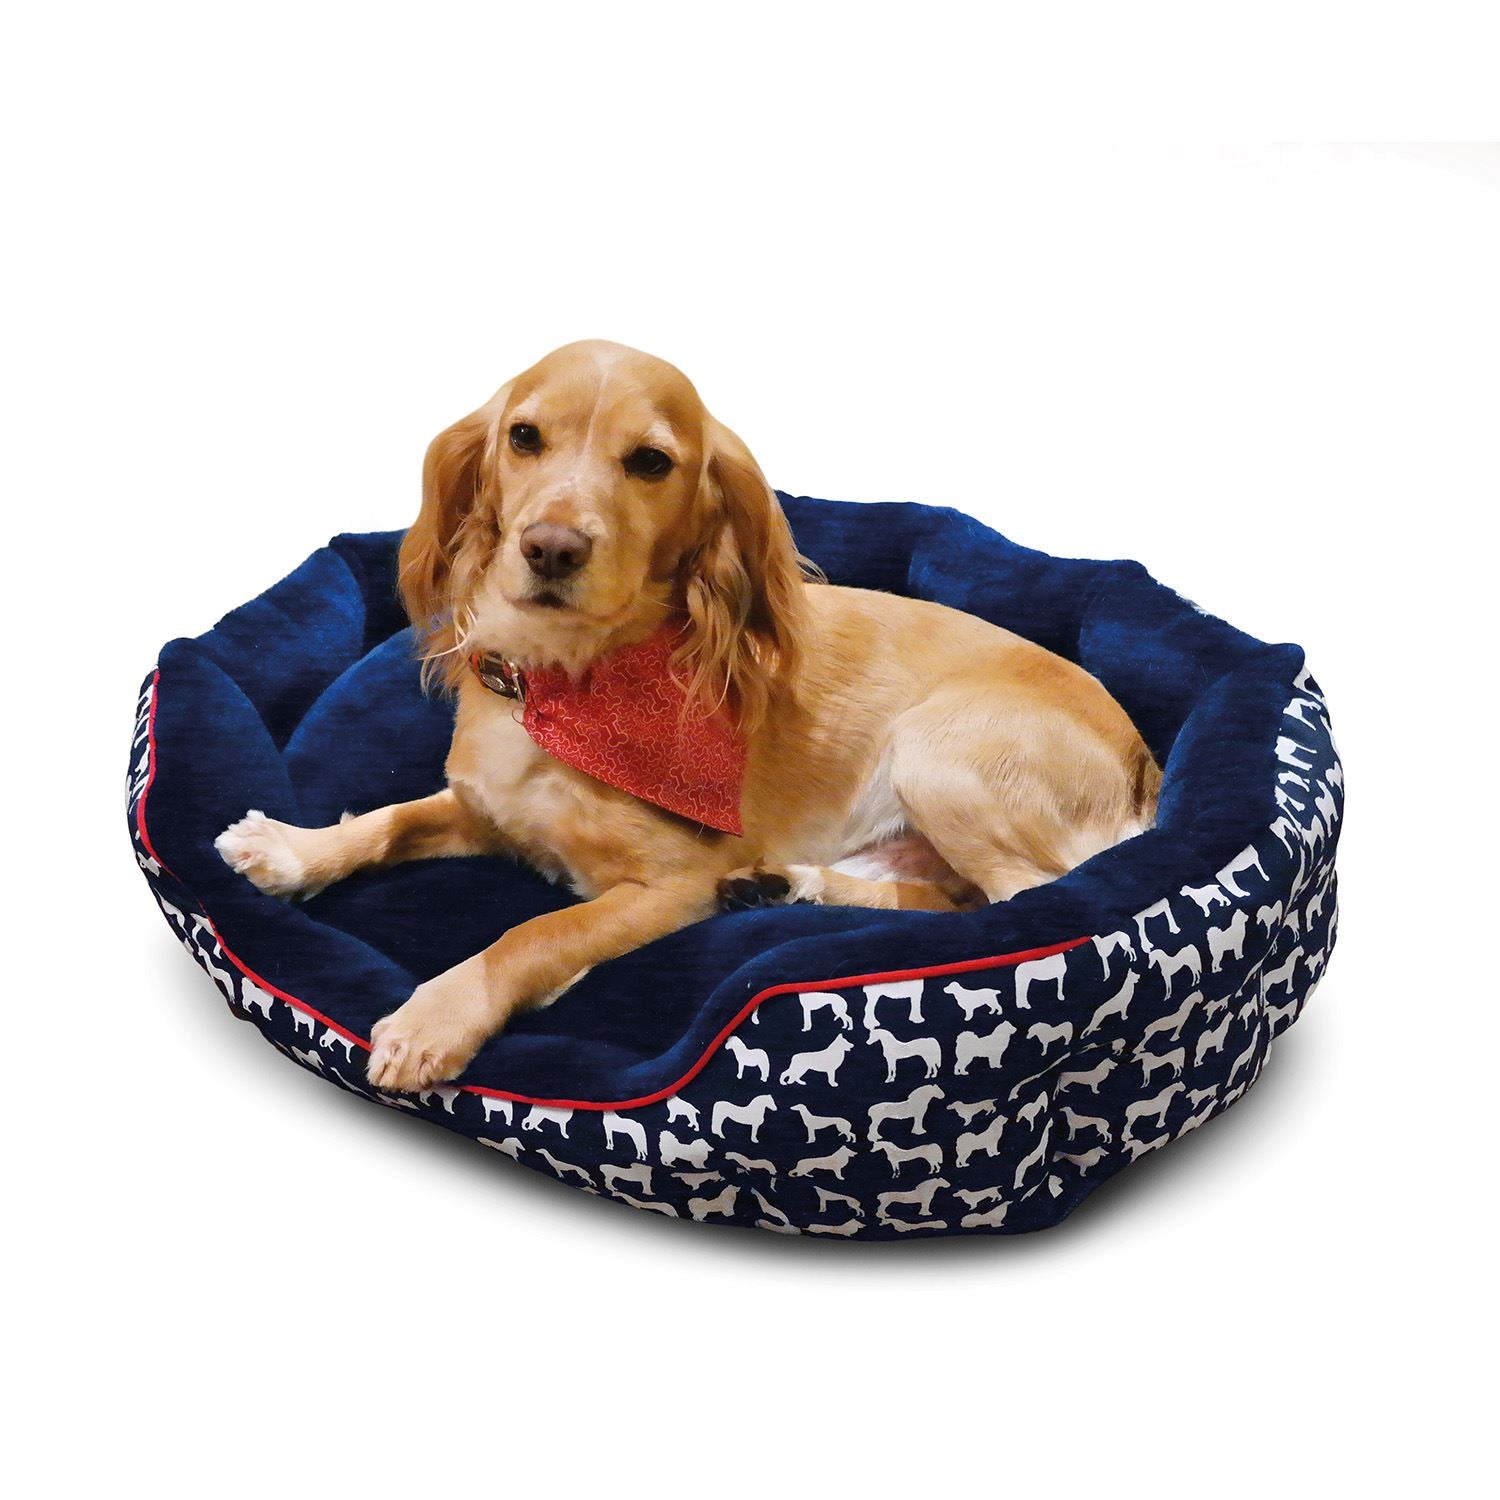 Whitaker Dog Bed Stanbury - Just Horse Riders